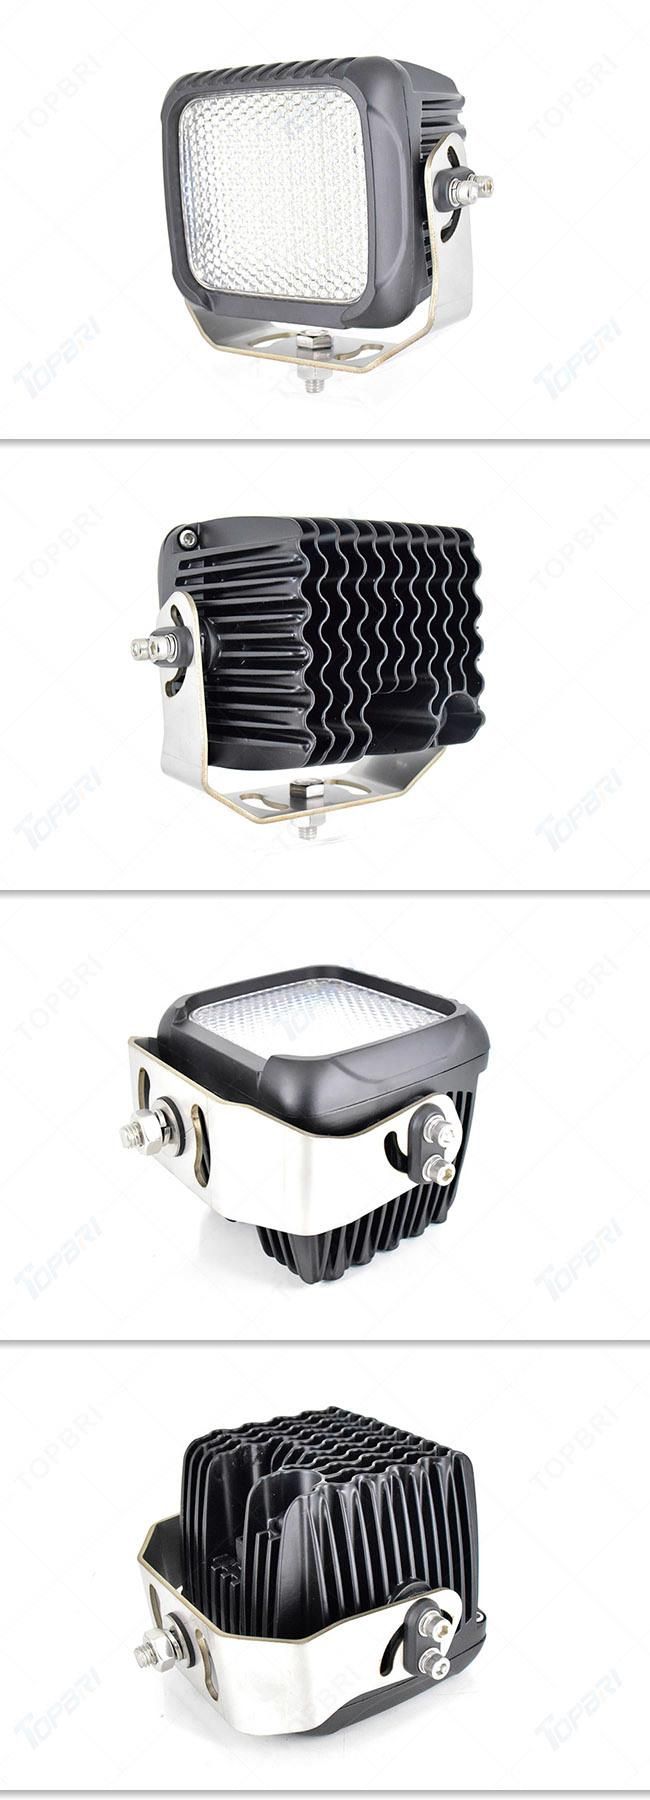 140W Square Flood Light 5" CREE LED Work Auto Lamp for Offroad 4X4